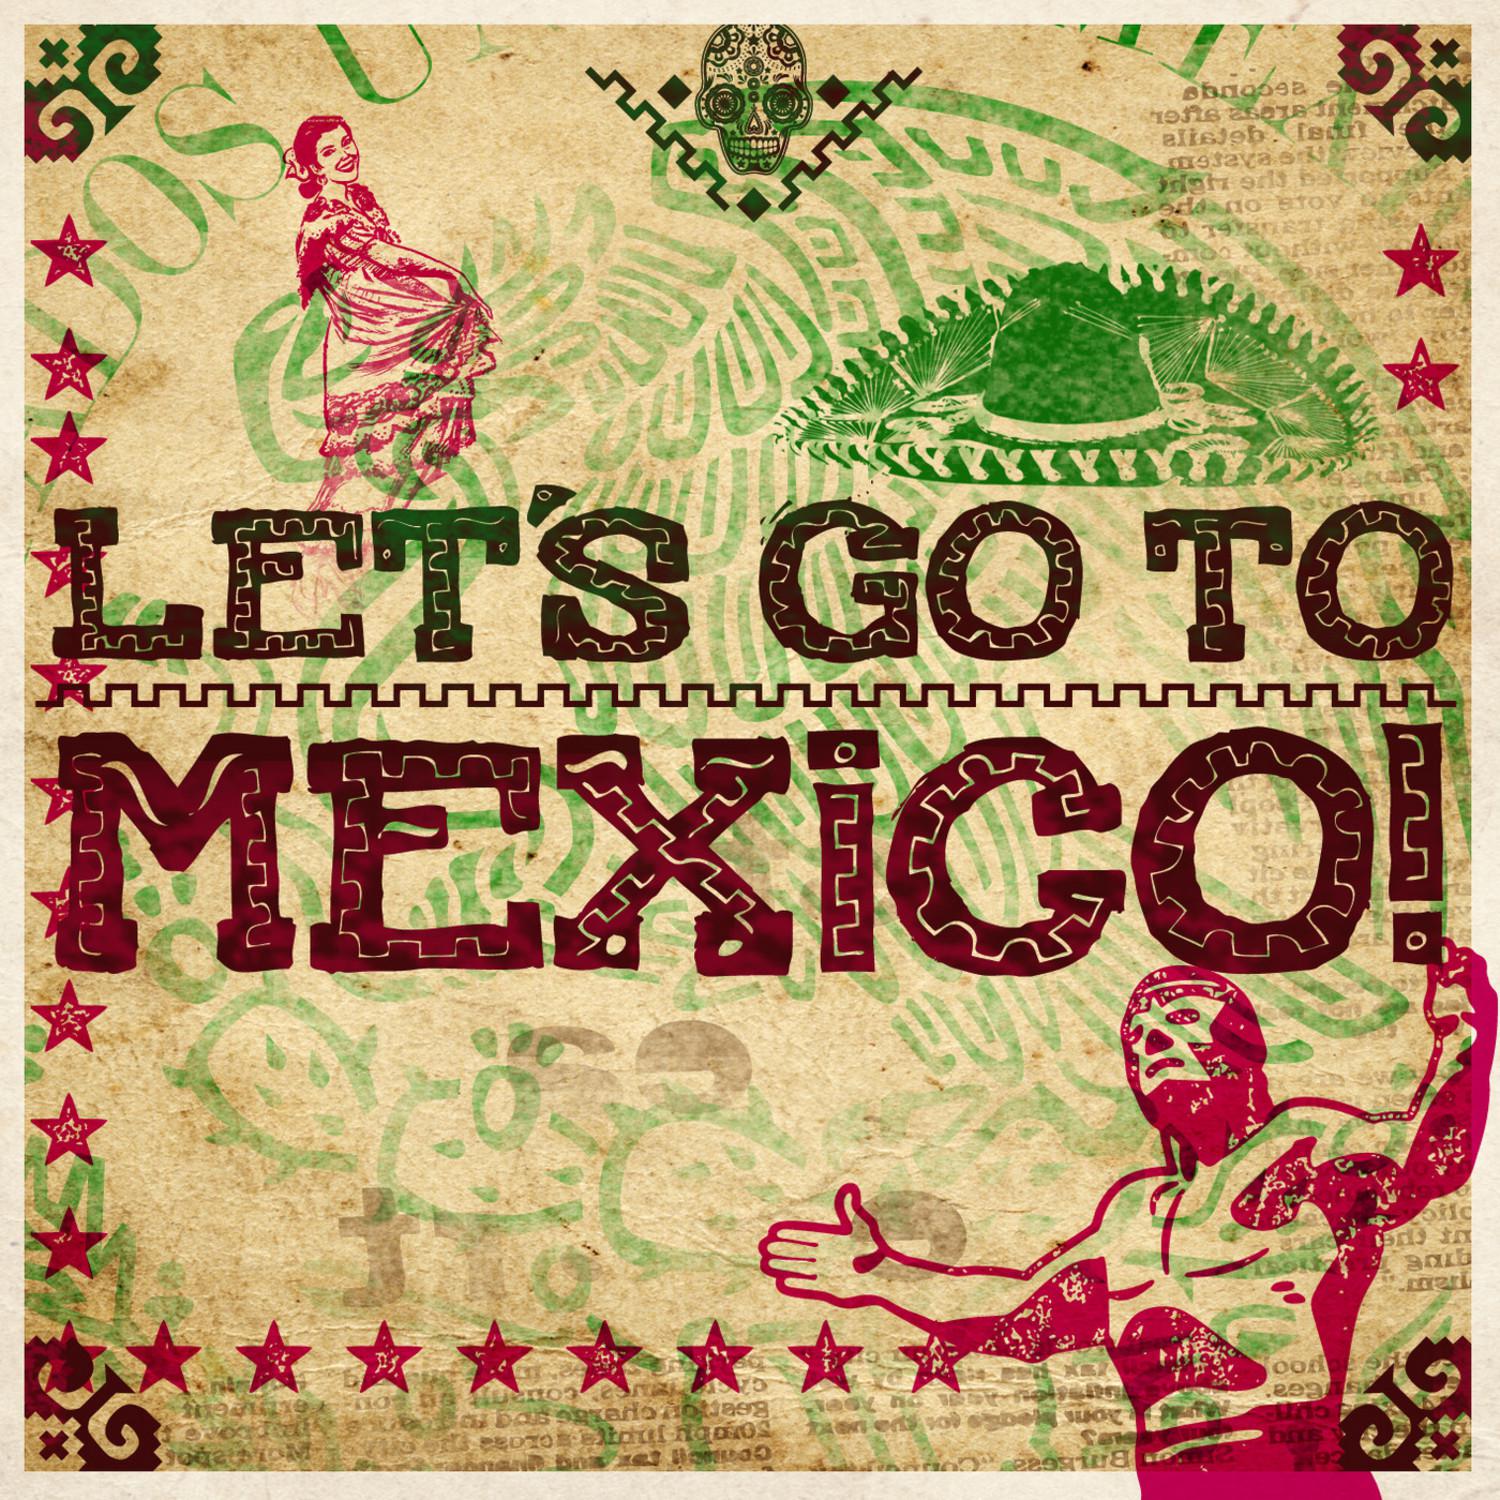 Let's Go To Mexico!